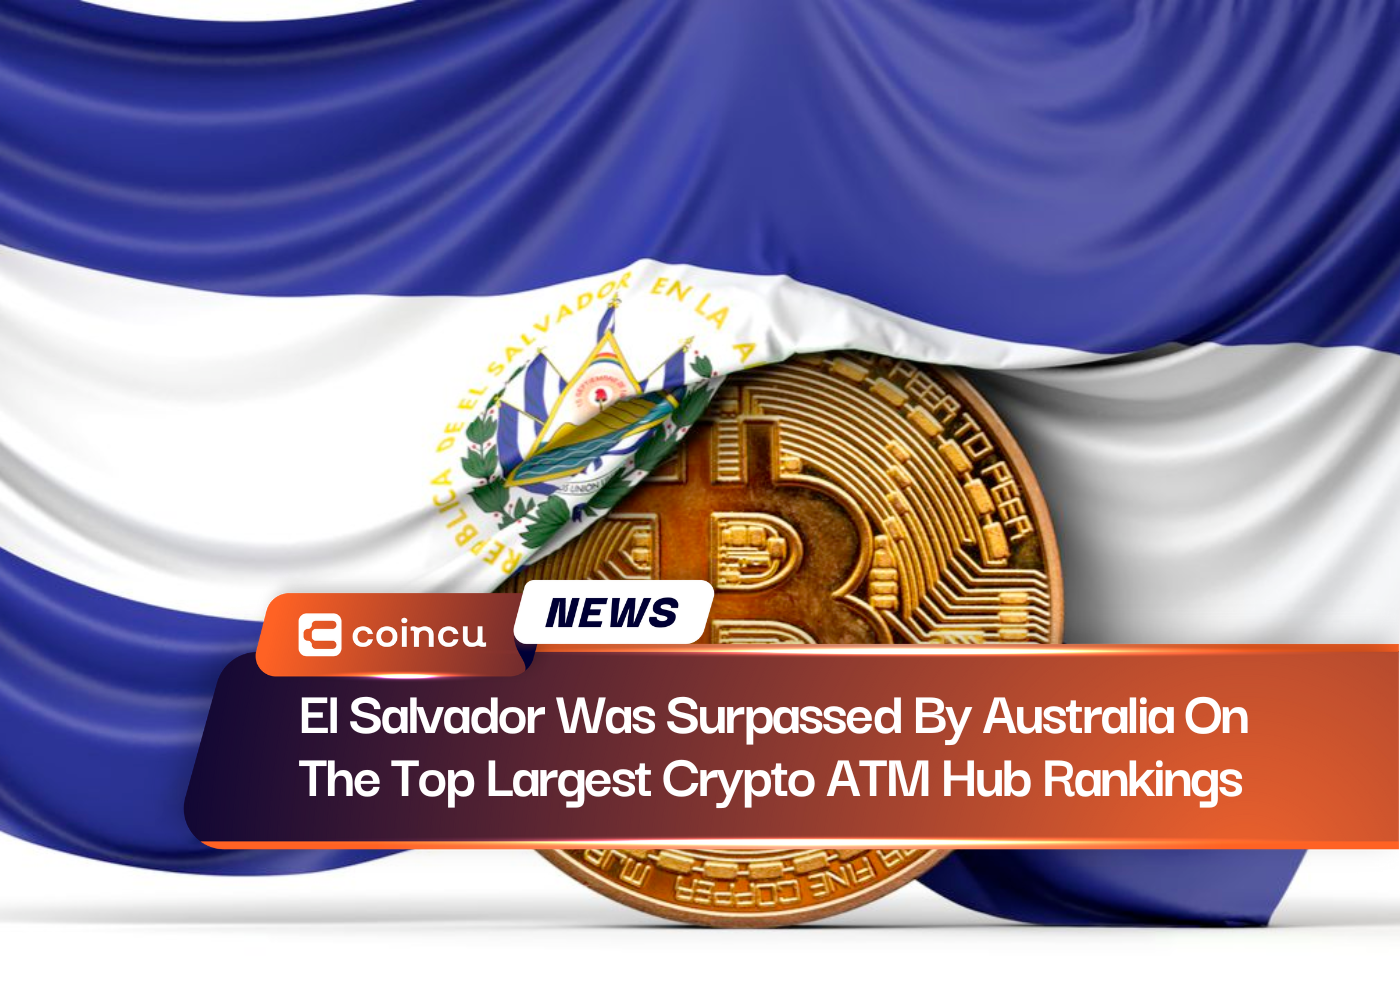 El Salvador Was Surpassed By Australia On The Top Largest Crypto ATM Hub Rankings